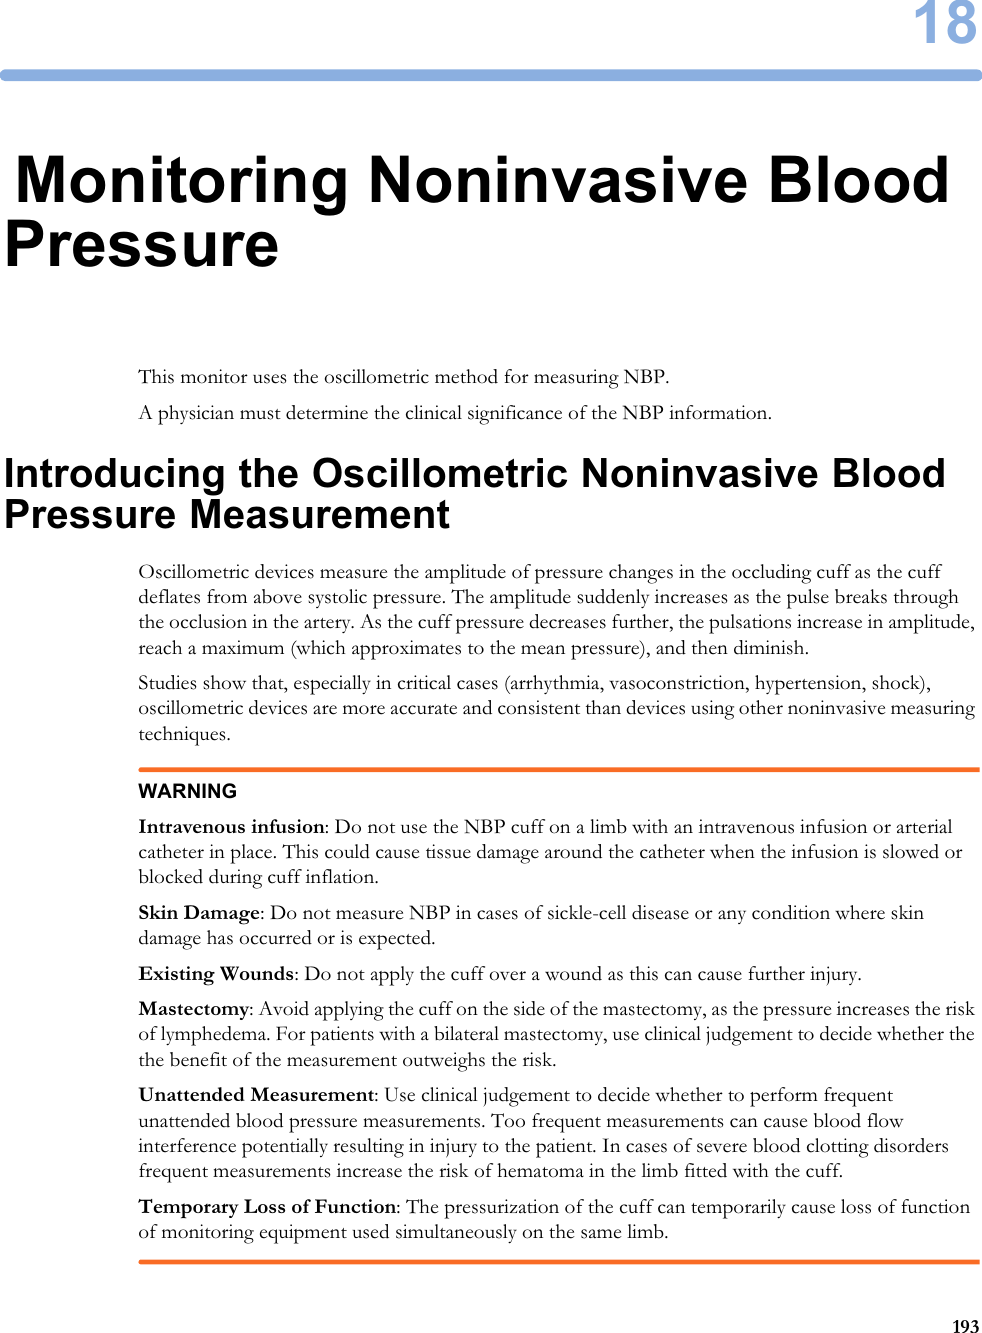 1819318Monitoring Noninvasive Blood PressureThis monitor uses the oscillometric method for measuring NBP.A physician must determine the clinical significance of the NBP information.Introducing the Oscillometric Noninvasive Blood Pressure MeasurementOscillometric devices measure the amplitude of pressure changes in the occluding cuff as the cuff deflates from above systolic pressure. The amplitude suddenly increases as the pulse breaks through the occlusion in the artery. As the cuff pressure decreases further, the pulsations increase in amplitude, reach a maximum (which approximates to the mean pressure), and then diminish.Studies show that, especially in critical cases (arrhythmia, vasoconstriction, hypertension, shock), oscillometric devices are more accurate and consistent than devices using other noninvasive measuring techniques.WARNINGIntravenous infusion: Do not use the NBP cuff on a limb with an intravenous infusion or arterial catheter in place. This could cause tissue damage around the catheter when the infusion is slowed or blocked during cuff inflation.Skin Damage: Do not measure NBP in cases of sickle-cell disease or any condition where skin damage has occurred or is expected.Existing Wounds: Do not apply the cuff over a wound as this can cause further injury.Mastectomy: Avoid applying the cuff on the side of the mastectomy, as the pressure increases the risk of lymphedema. For patients with a bilateral mastectomy, use clinical judgement to decide whether the the benefit of the measurement outweighs the risk.Unattended Measurement: Use clinical judgement to decide whether to perform frequent unattended blood pressure measurements. Too frequent measurements can cause blood flow interference potentially resulting in injury to the patient. In cases of severe blood clotting disorders frequent measurements increase the risk of hematoma in the limb fitted with the cuff.Temporary Loss of Function: The pressurization of the cuff can temporarily cause loss of function of monitoring equipment used simultaneously on the same limb.